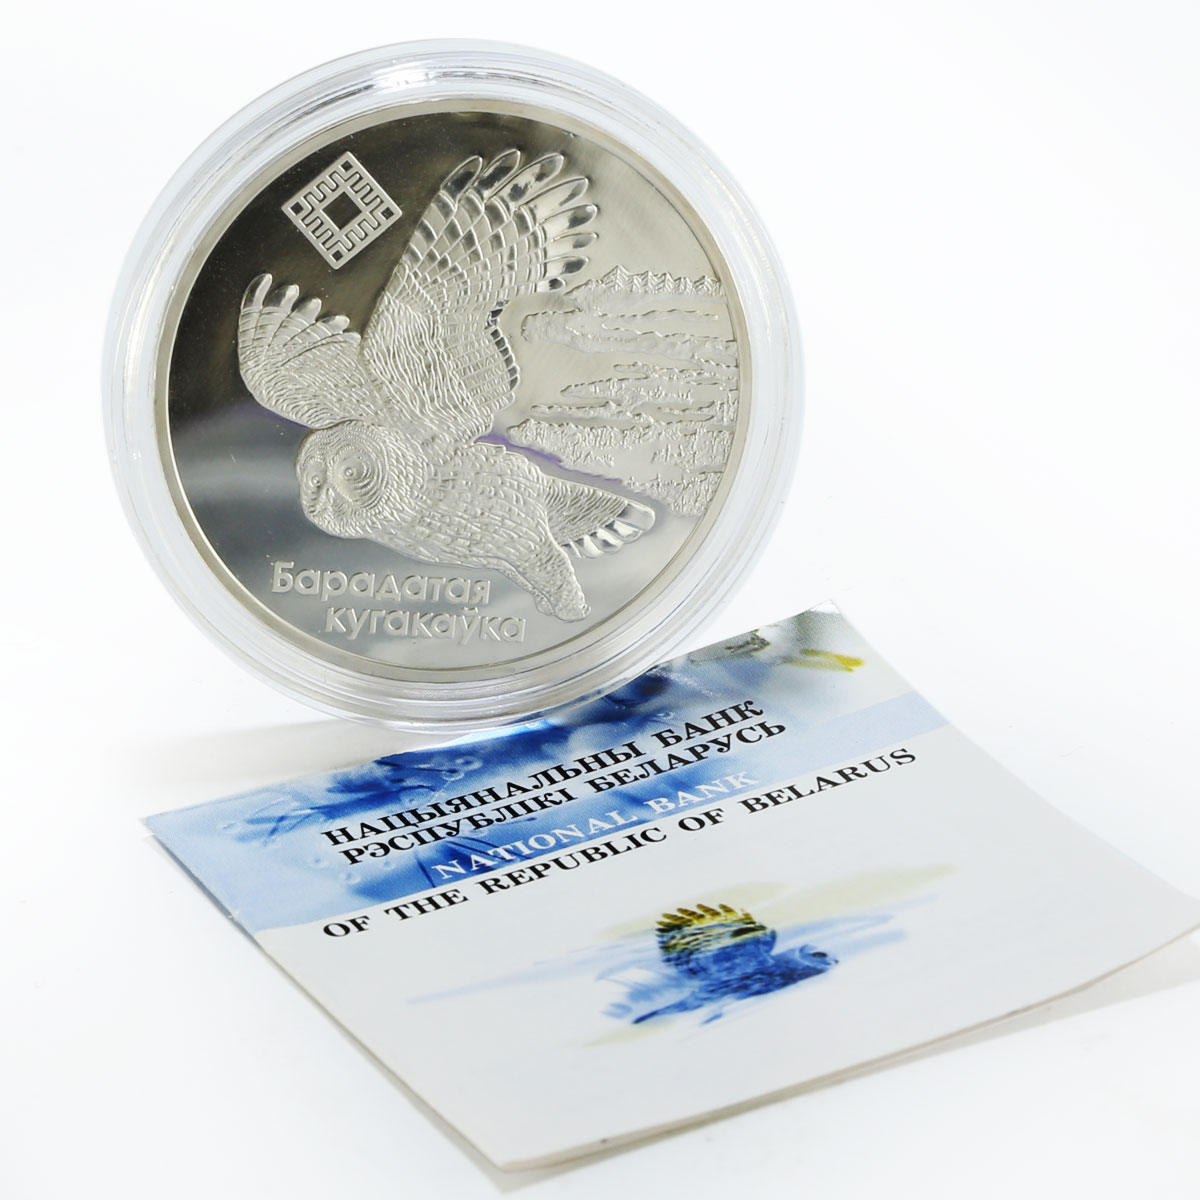 Belarus 20 rubles Bogs of Almany owl proof silver coin 2005